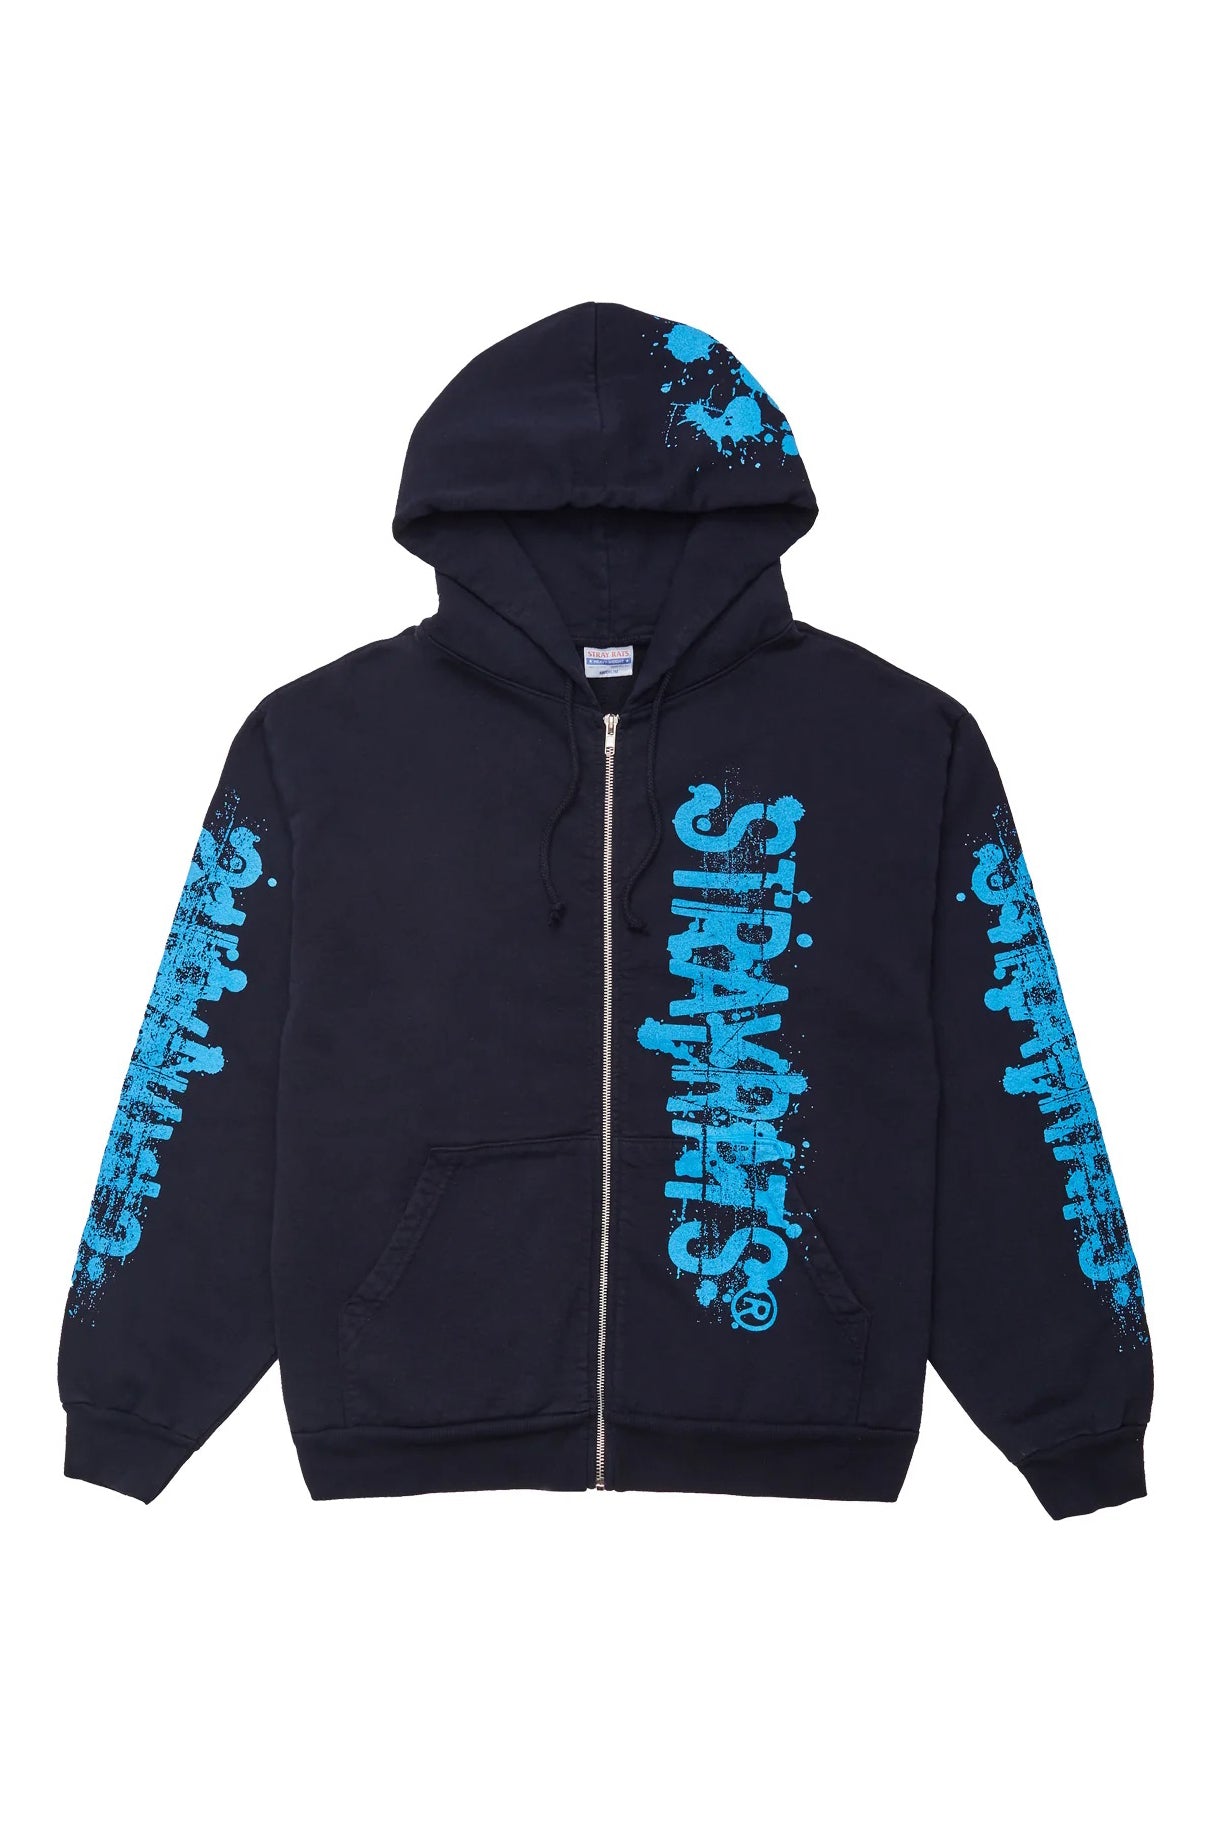 The STRAY RATS - Roadkill Zip Up Hoodie  available online with global shipping, and in PAM Stores Melbourne and Sydney.